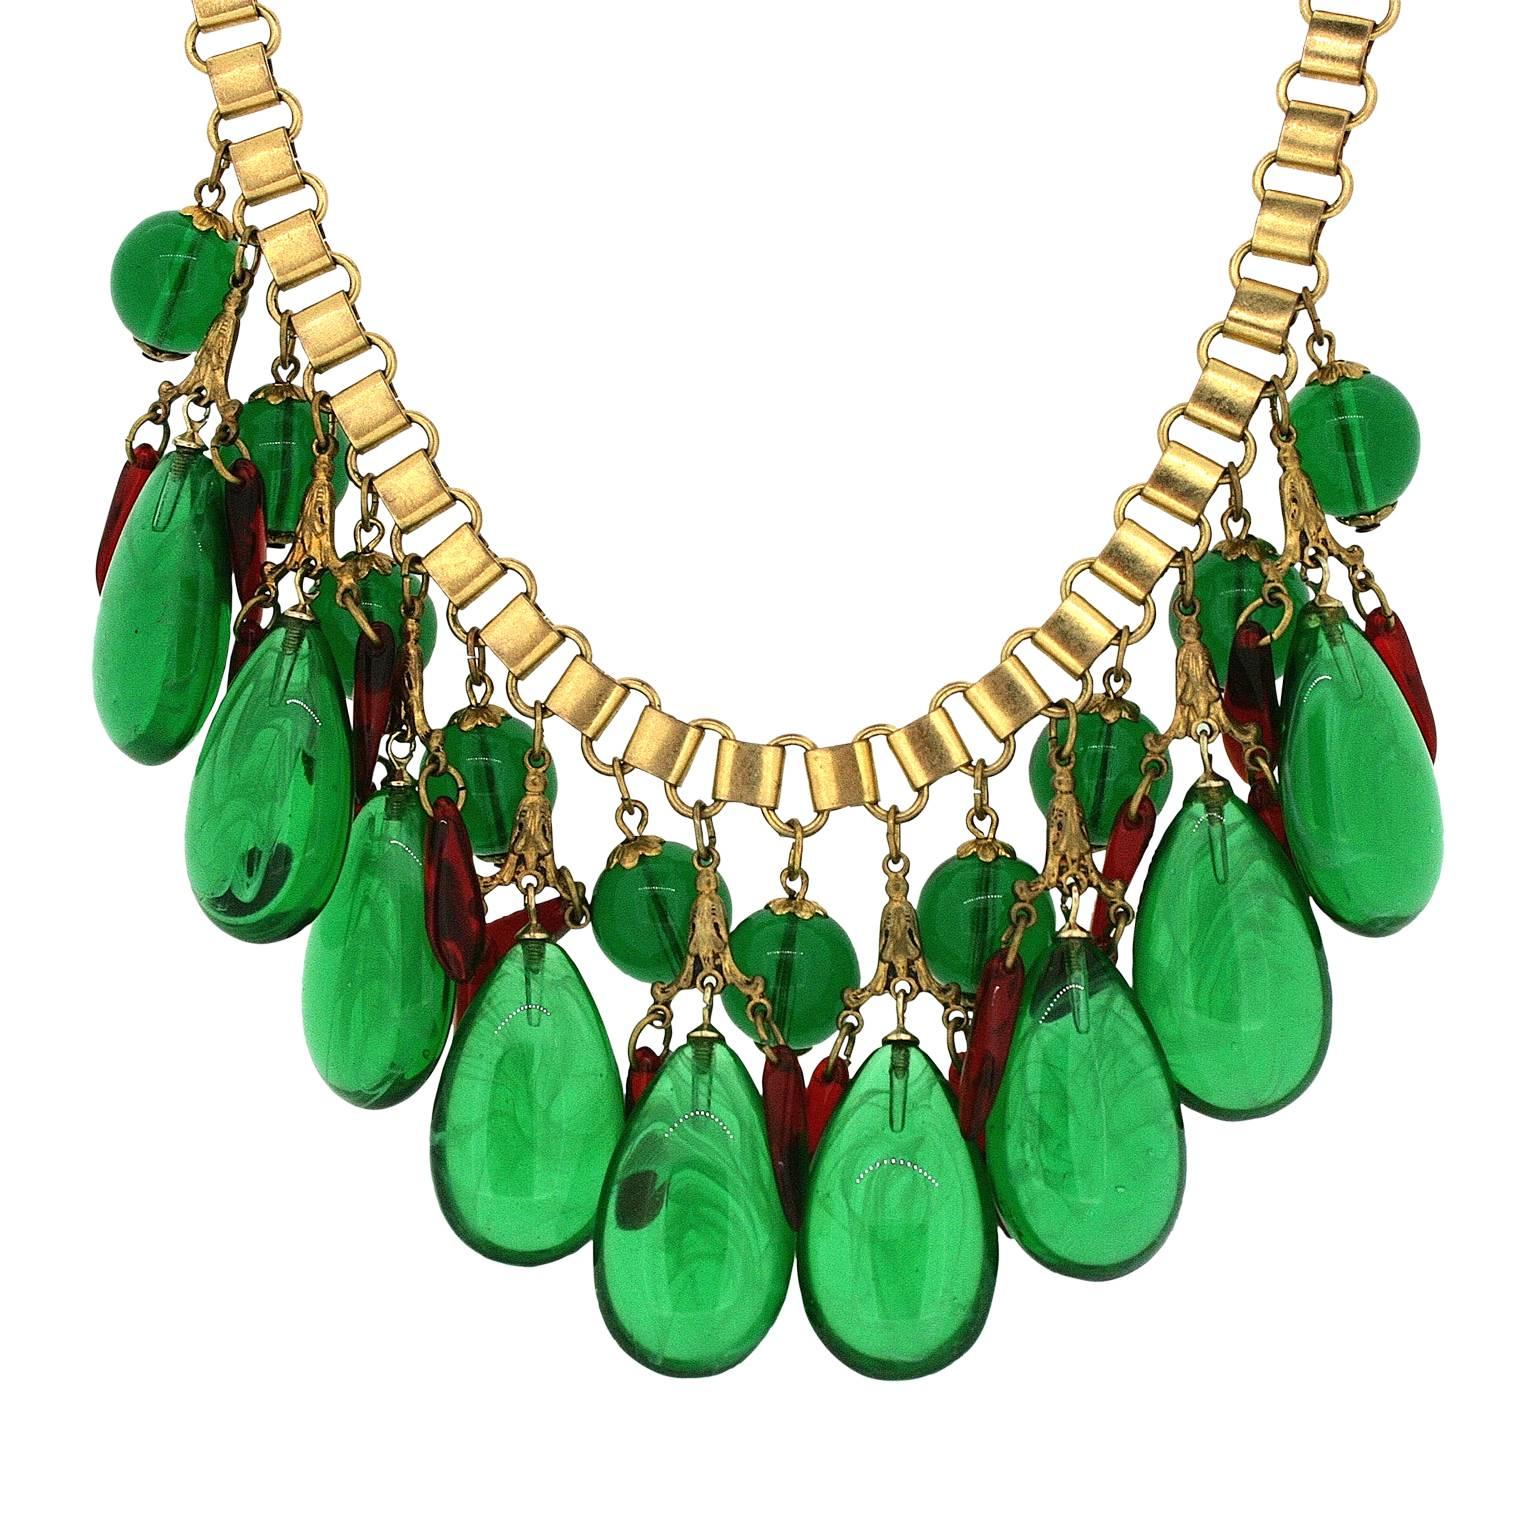 1940s Red and Green Glass Vintage Necklace and Earrings Set In Good Condition For Sale In Wigan, GB